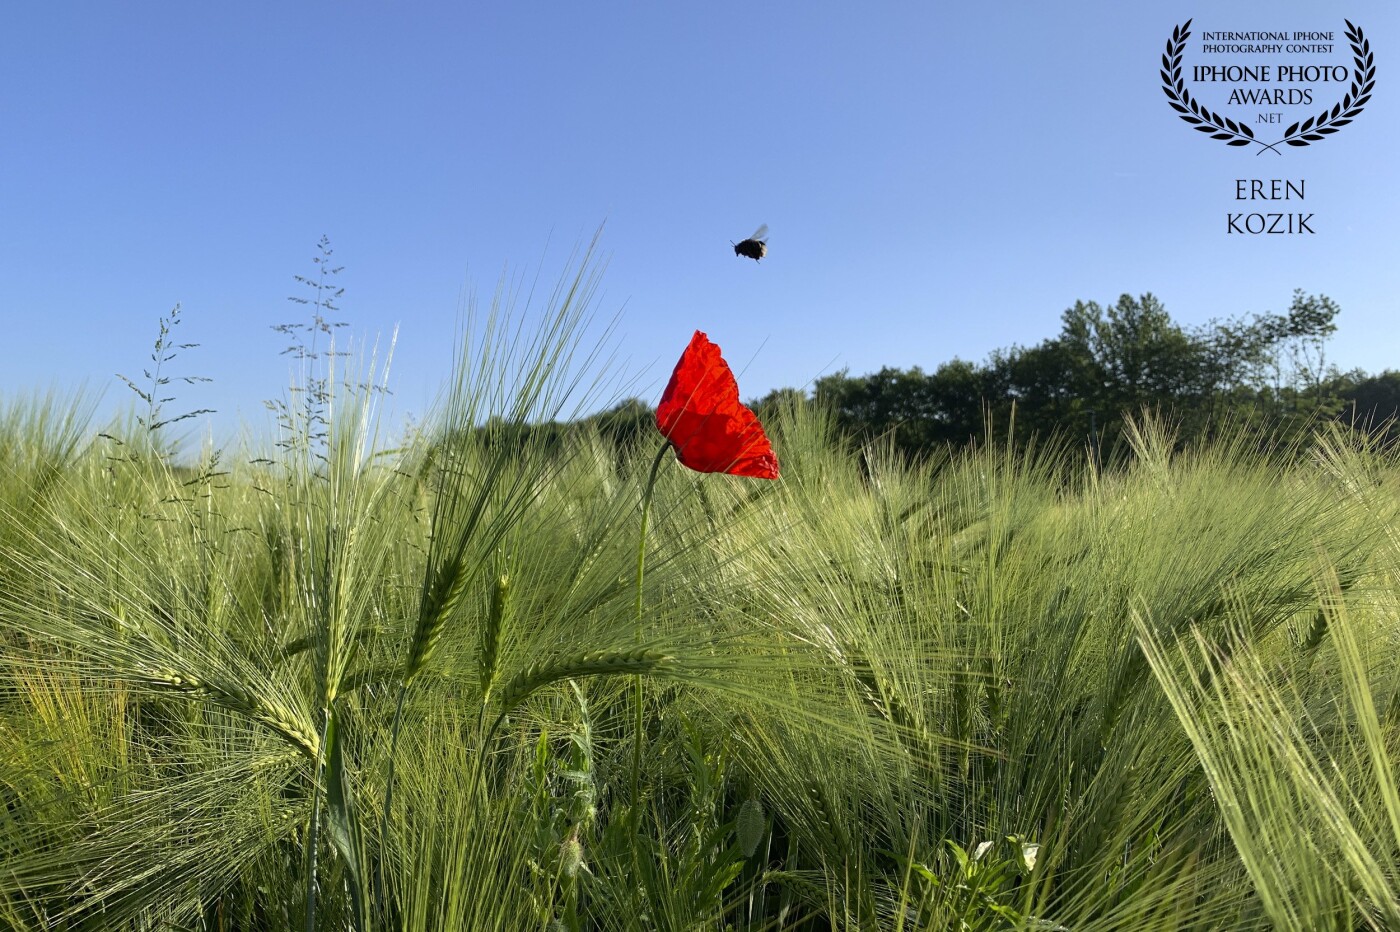 This is a wonderful example of "timing is everything".<br />
I constantly marvel at what we’re capturing with our iPhones and this photo highlights perfectly, the wonders of iPhone photography. In my eyes the red poppy is beautiful and the bumble is a special subject.